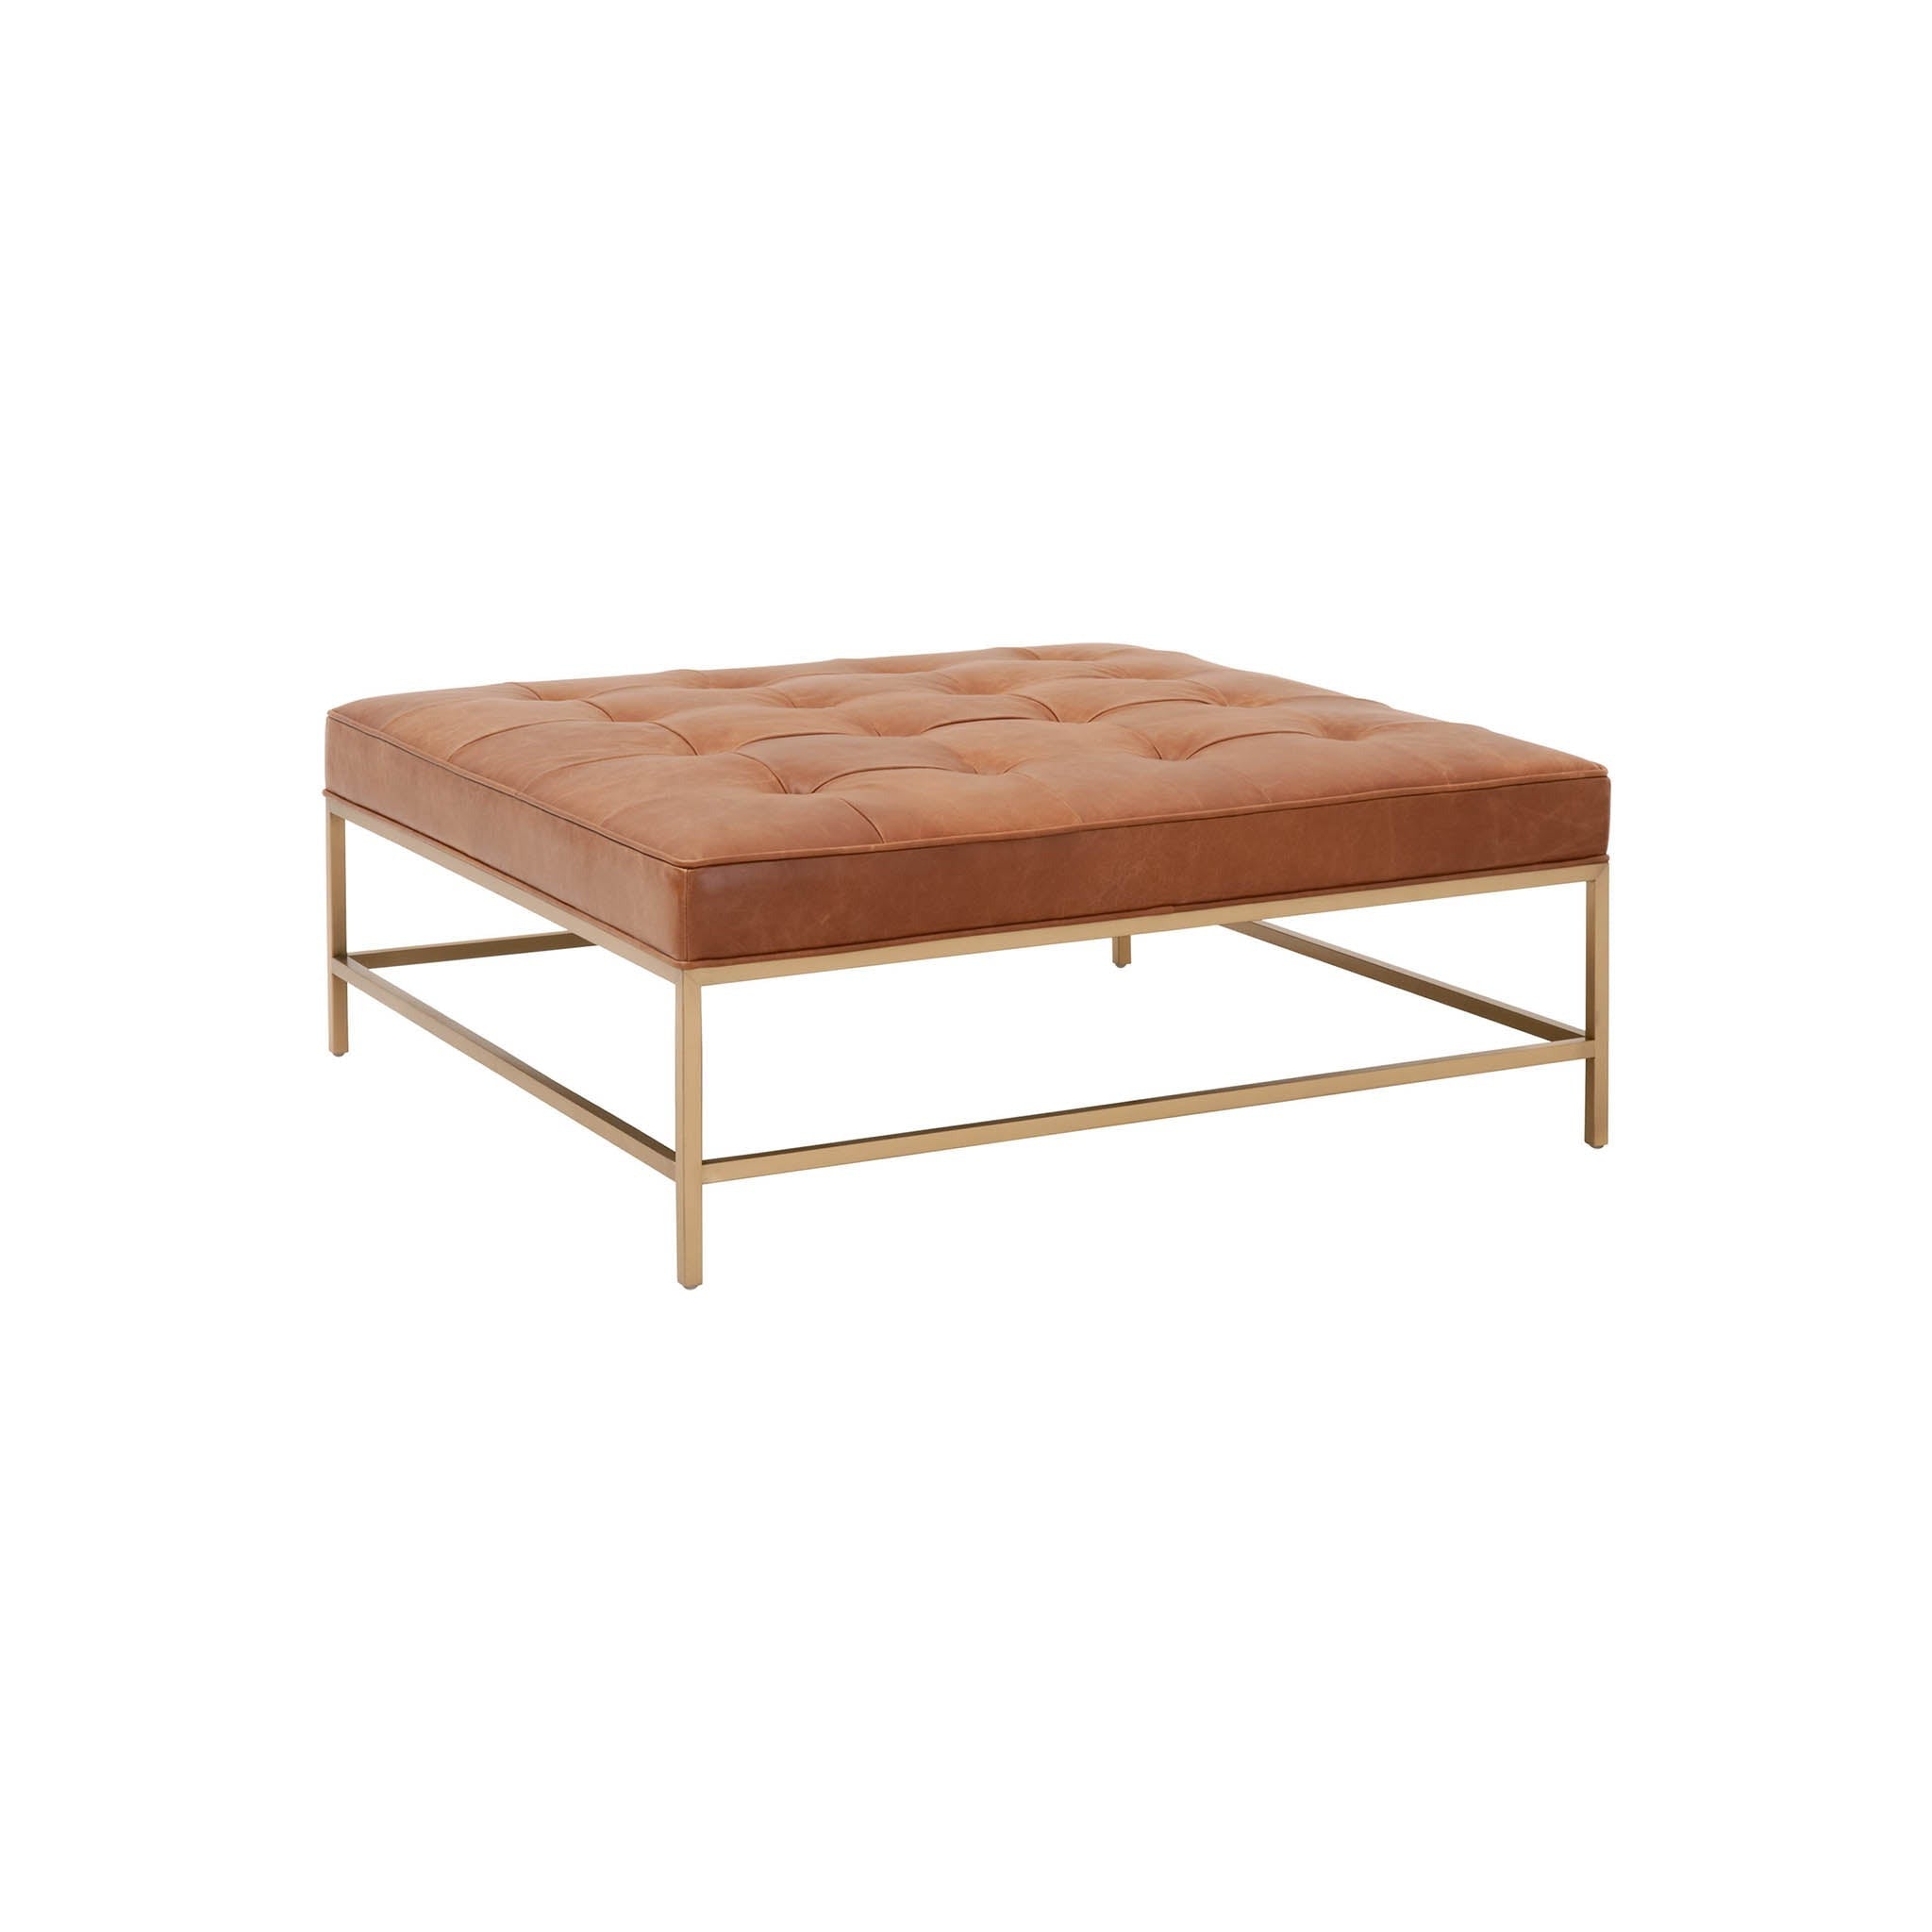 Anais Upholstered Coffee Table